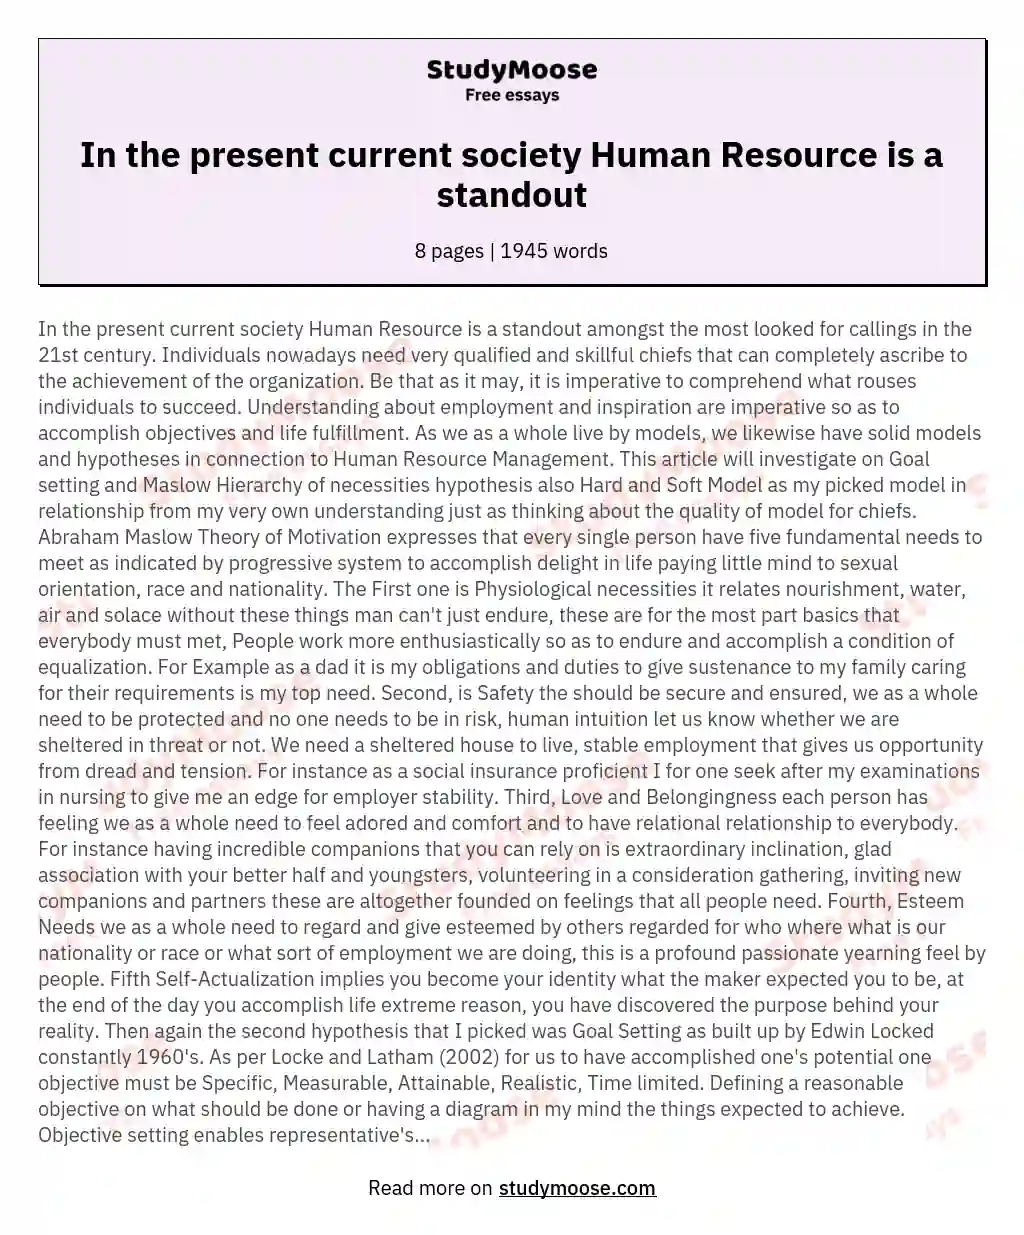 In the present current society Human Resource is a standout essay